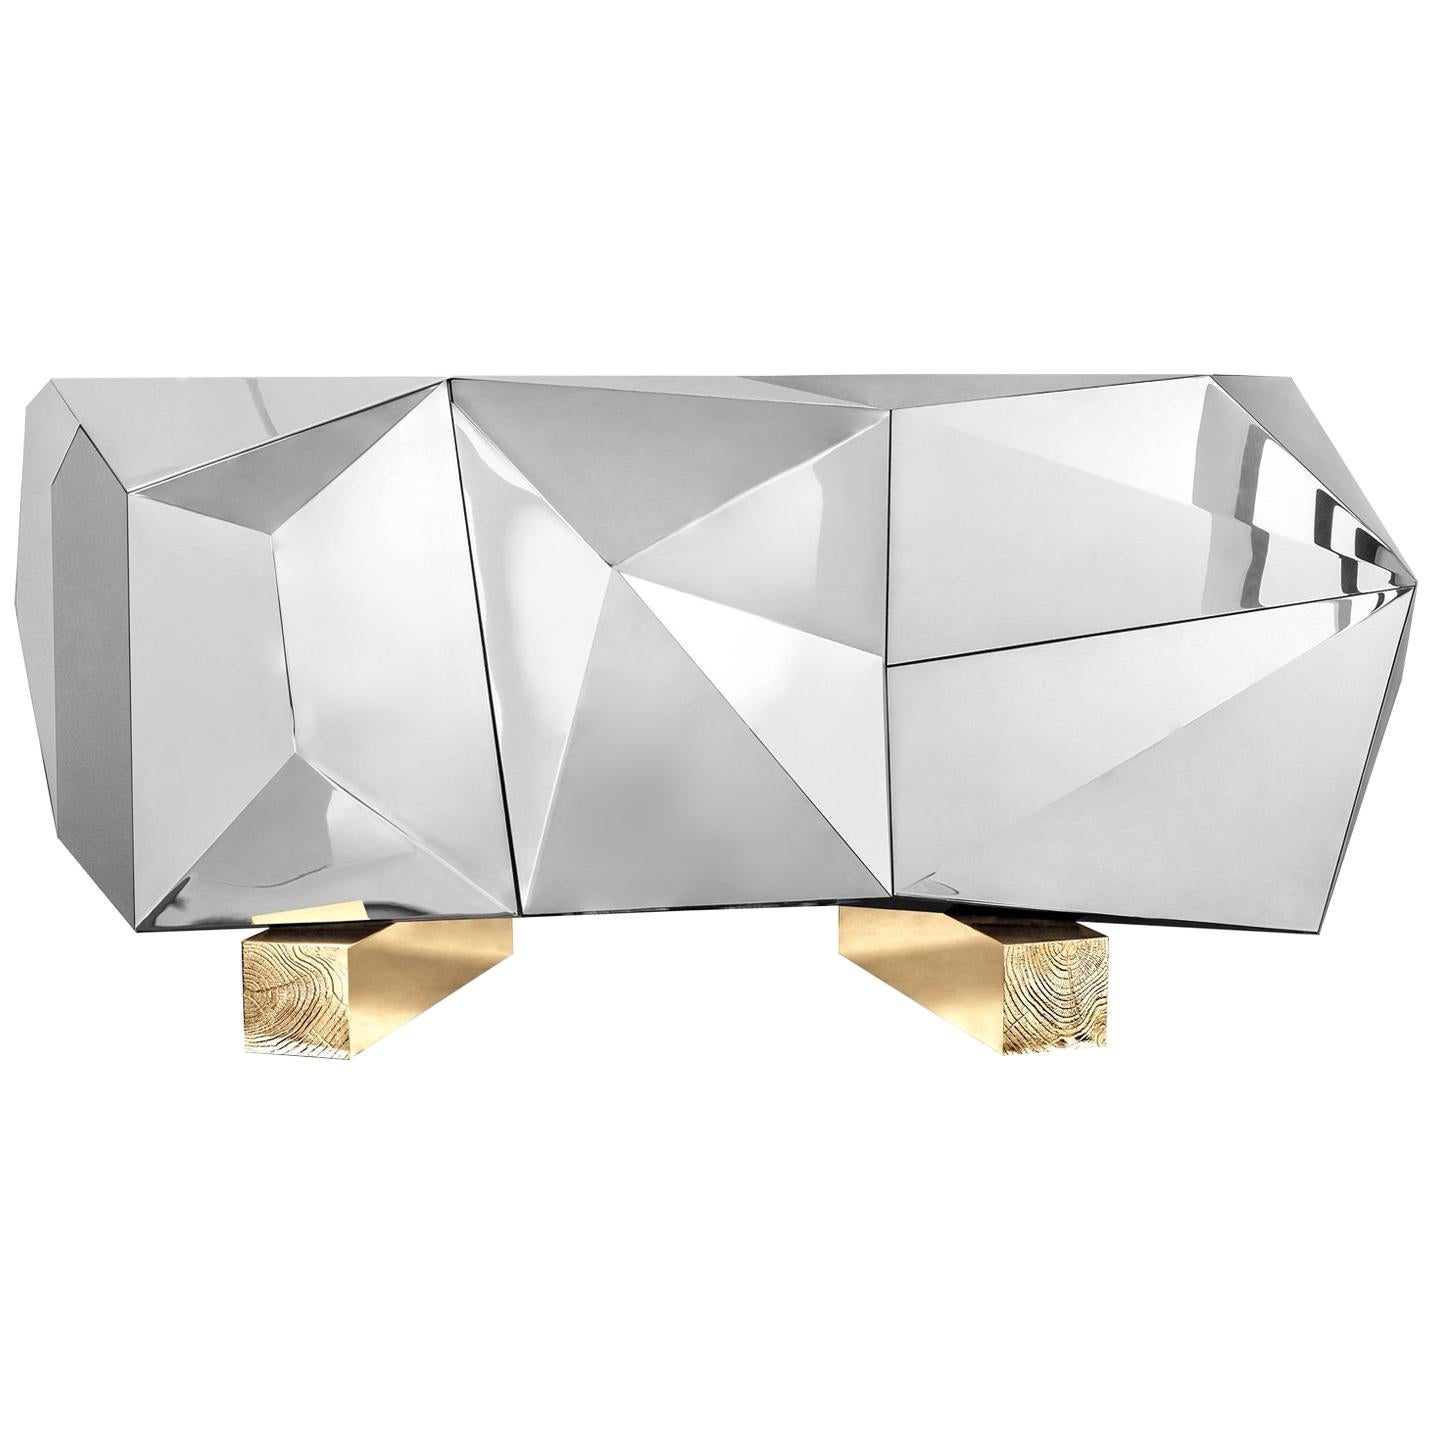 Fortnox Sideboard in Polished Stainless Steel